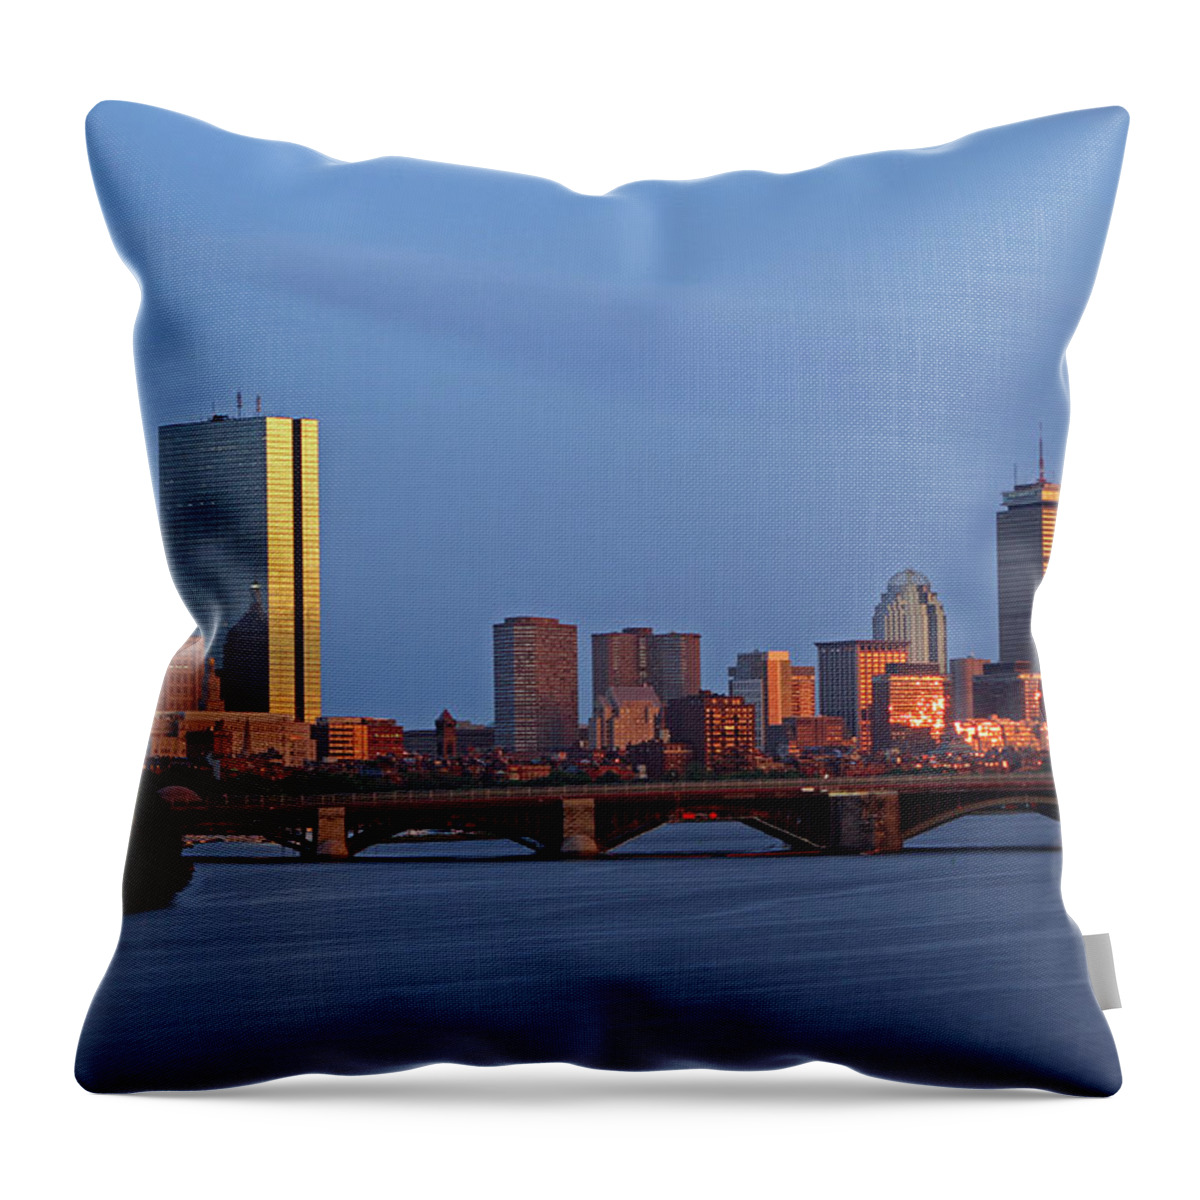 Boston Throw Pillow featuring the photograph Boston Skyline Sunset by Juergen Roth